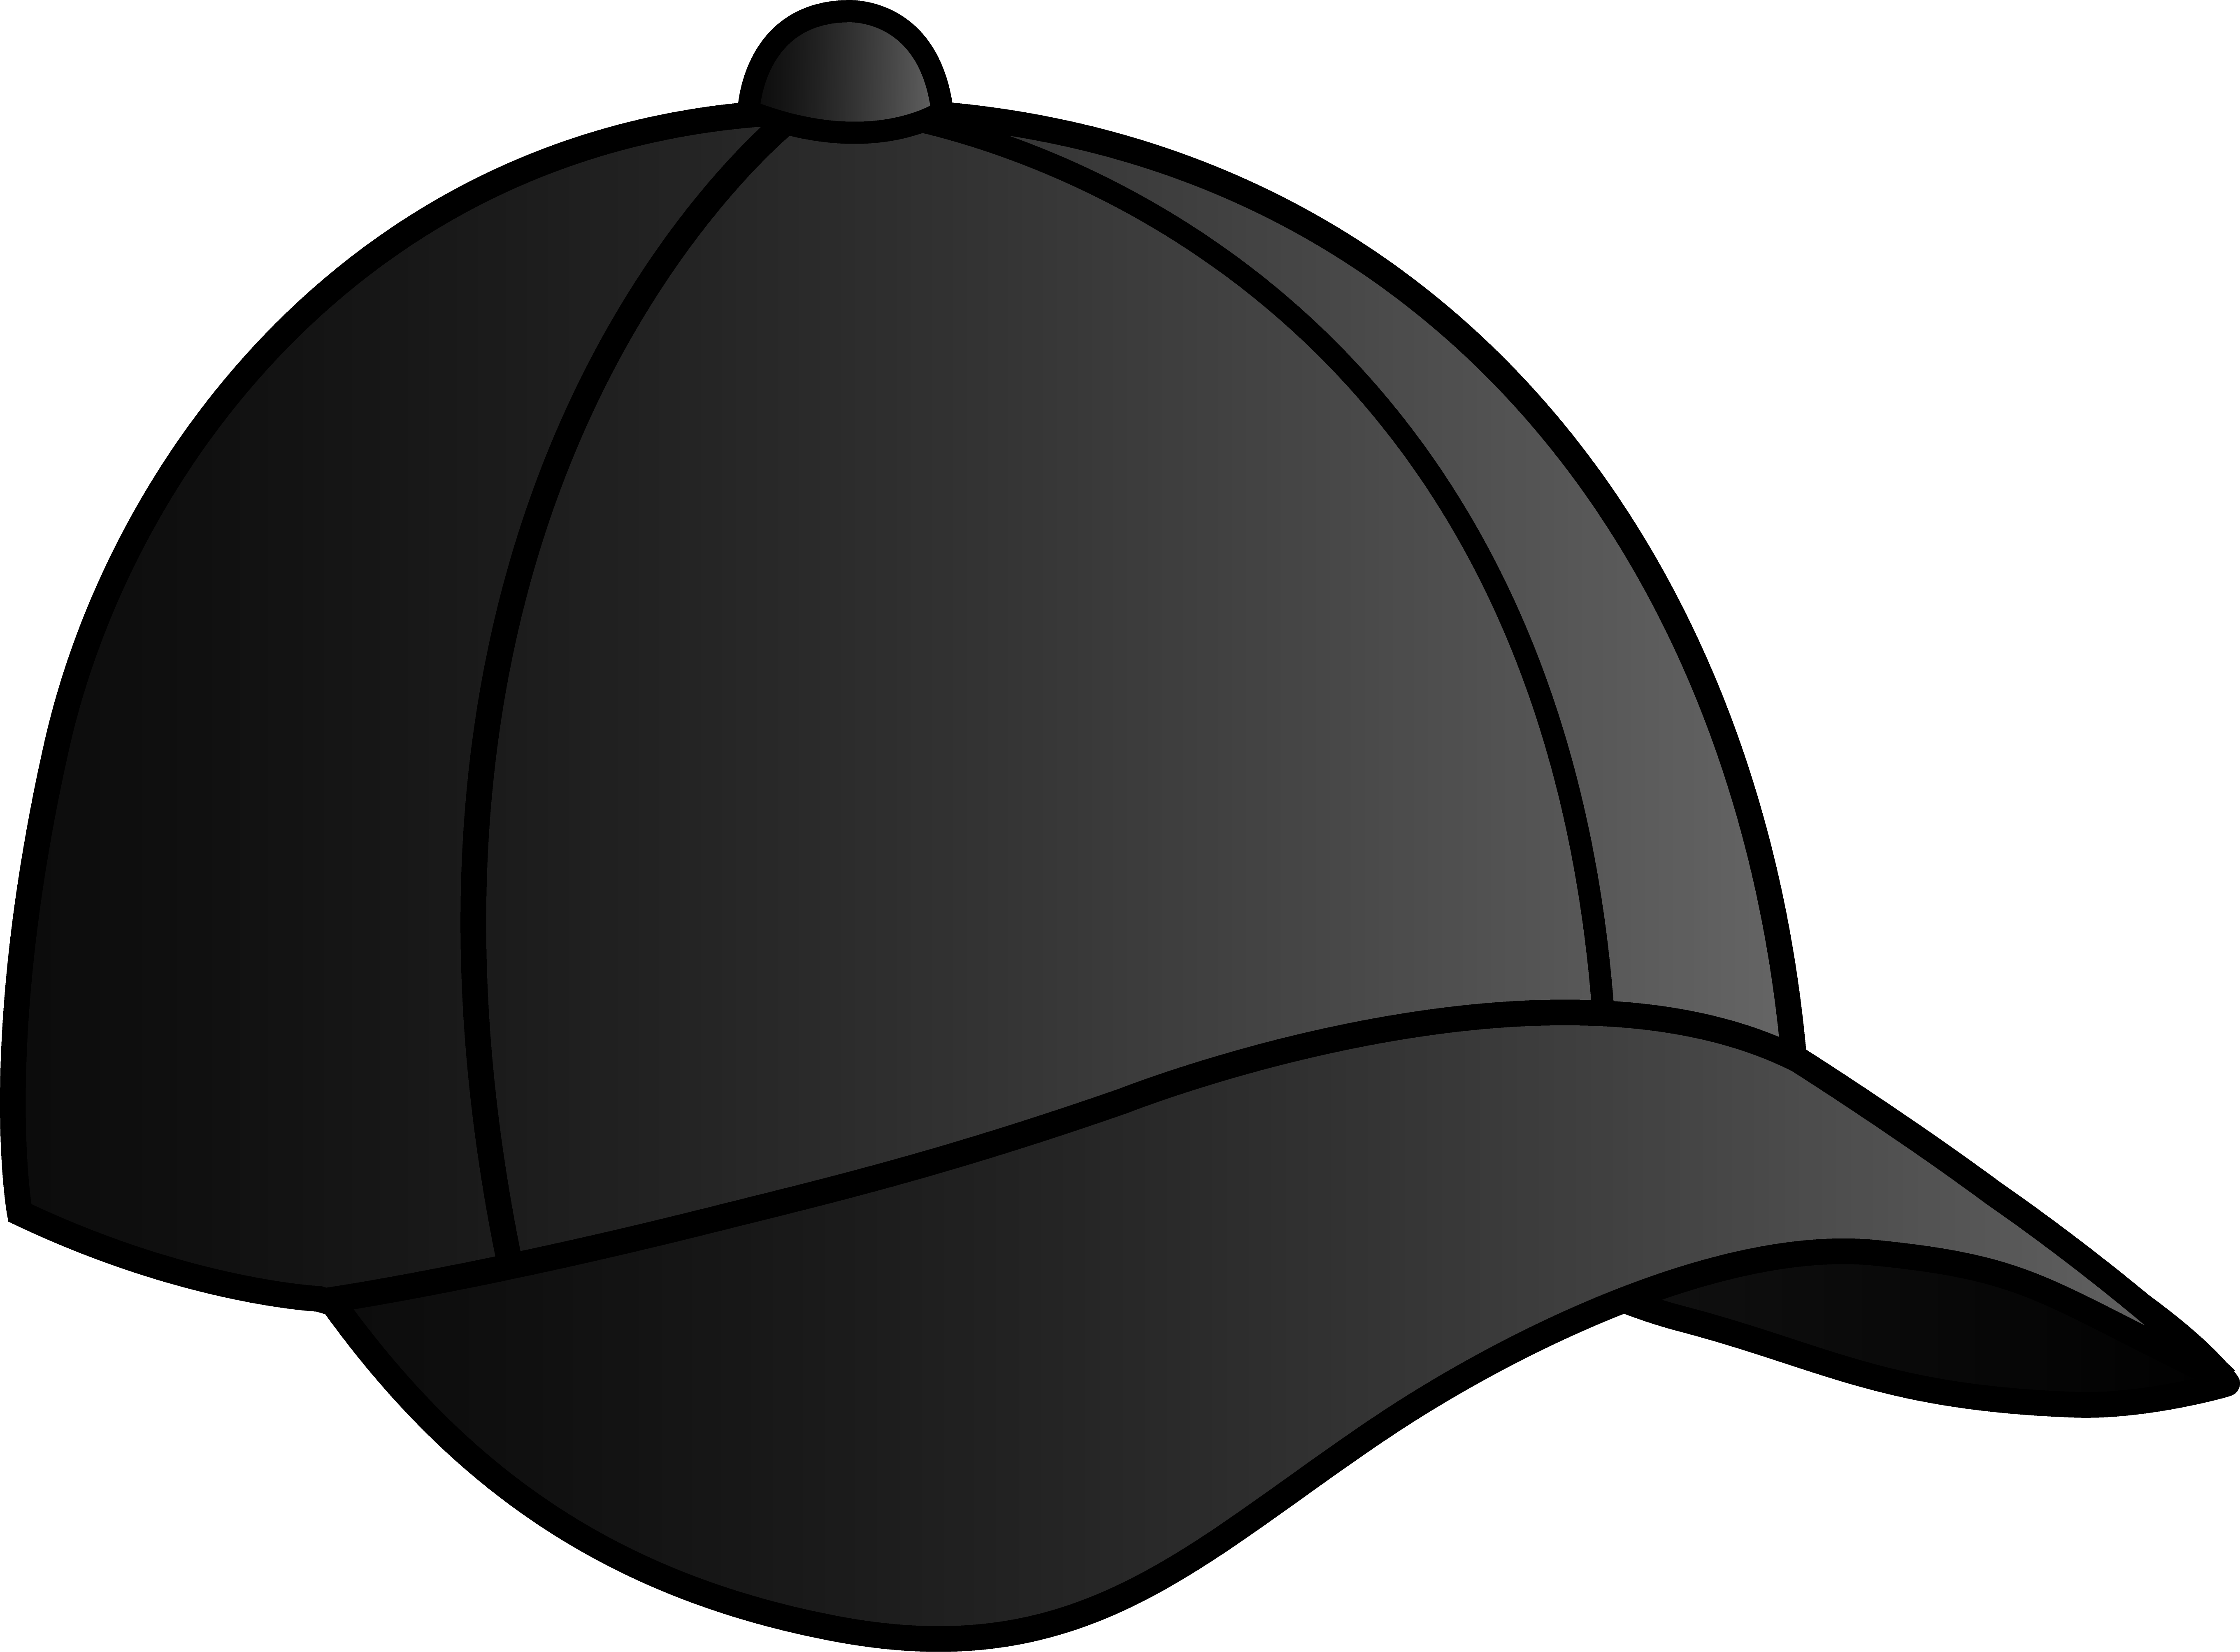 Free Black Hat Cliparts Download Free Black Hat Cliparts Png Images